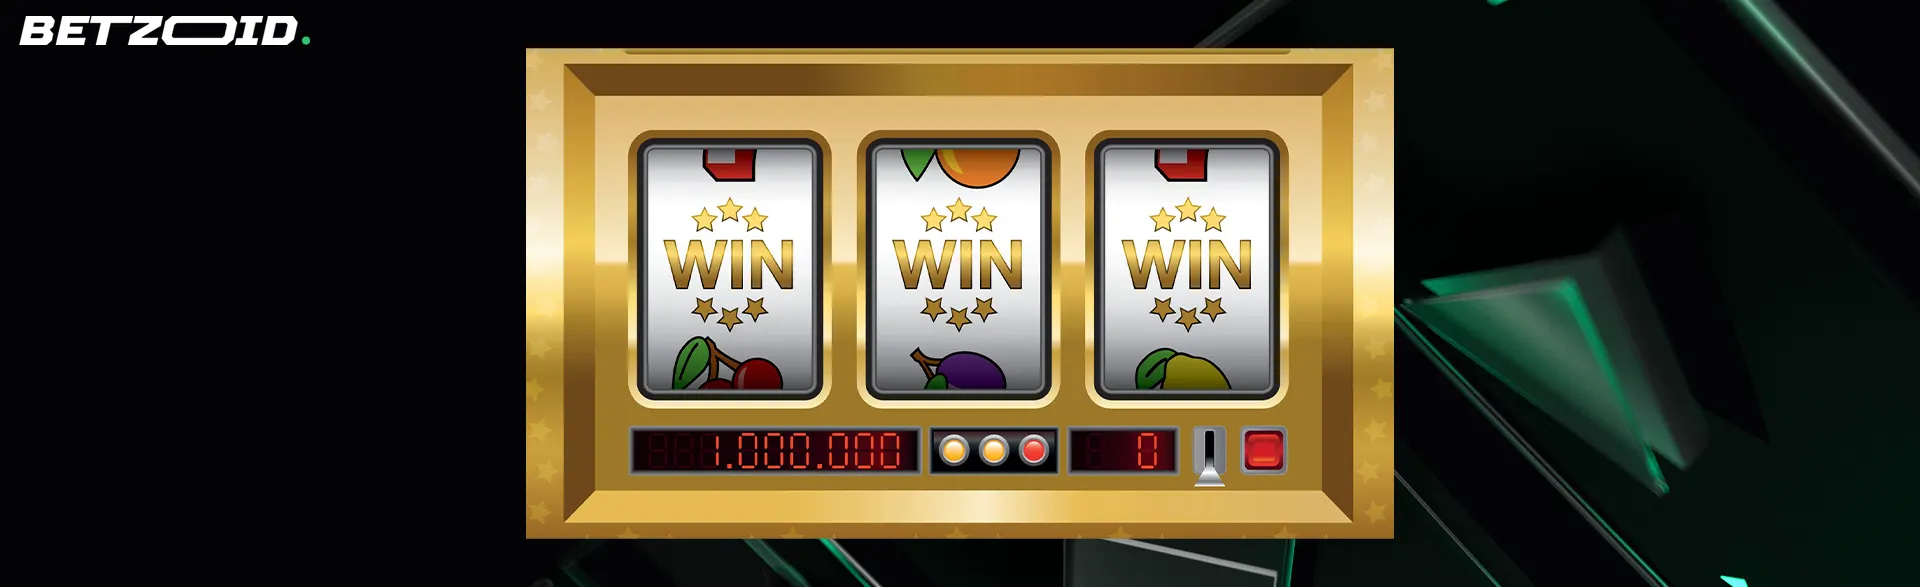 Slot machine displaying triple 'WIN' with a one billion jackpot, highlighting the allure of progressive jackpots at online casinos in Canada.